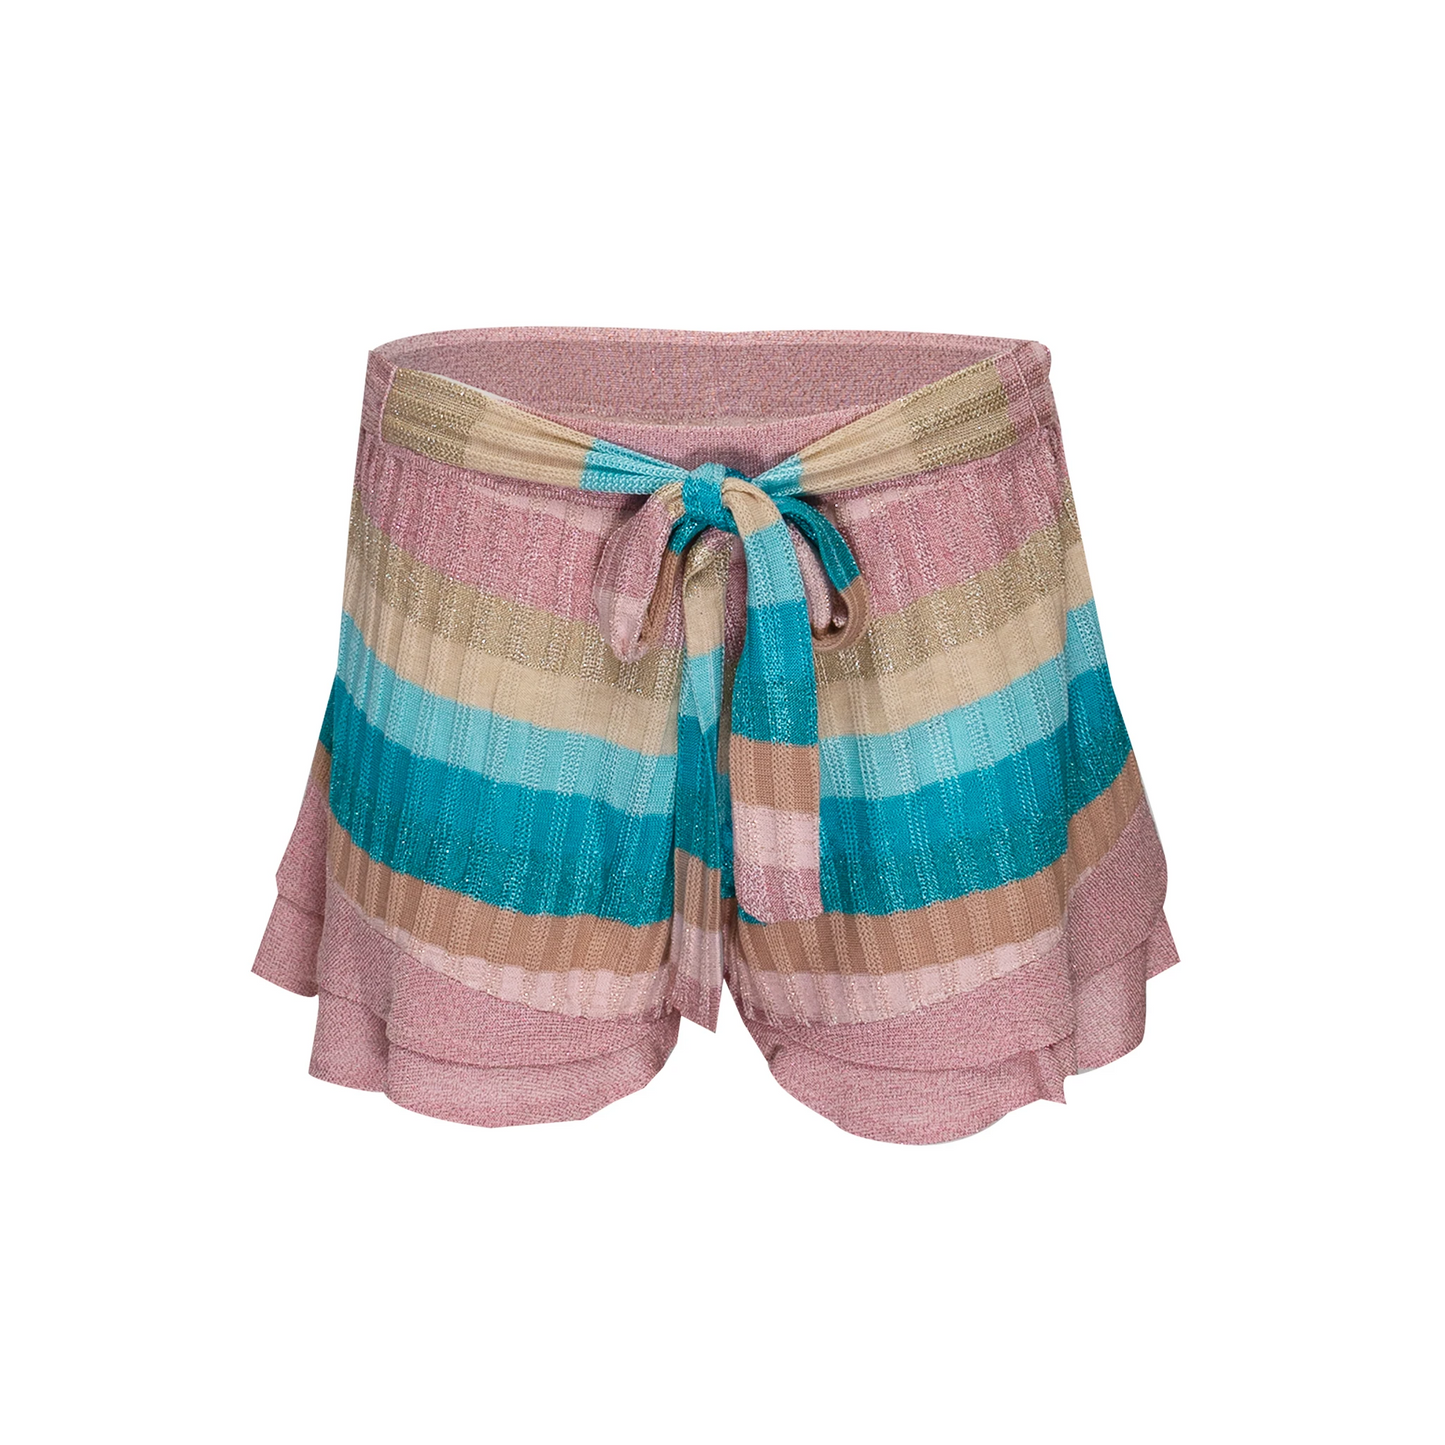 Striped Frill Shorts In Drop Stitch Knit With Ties Orange